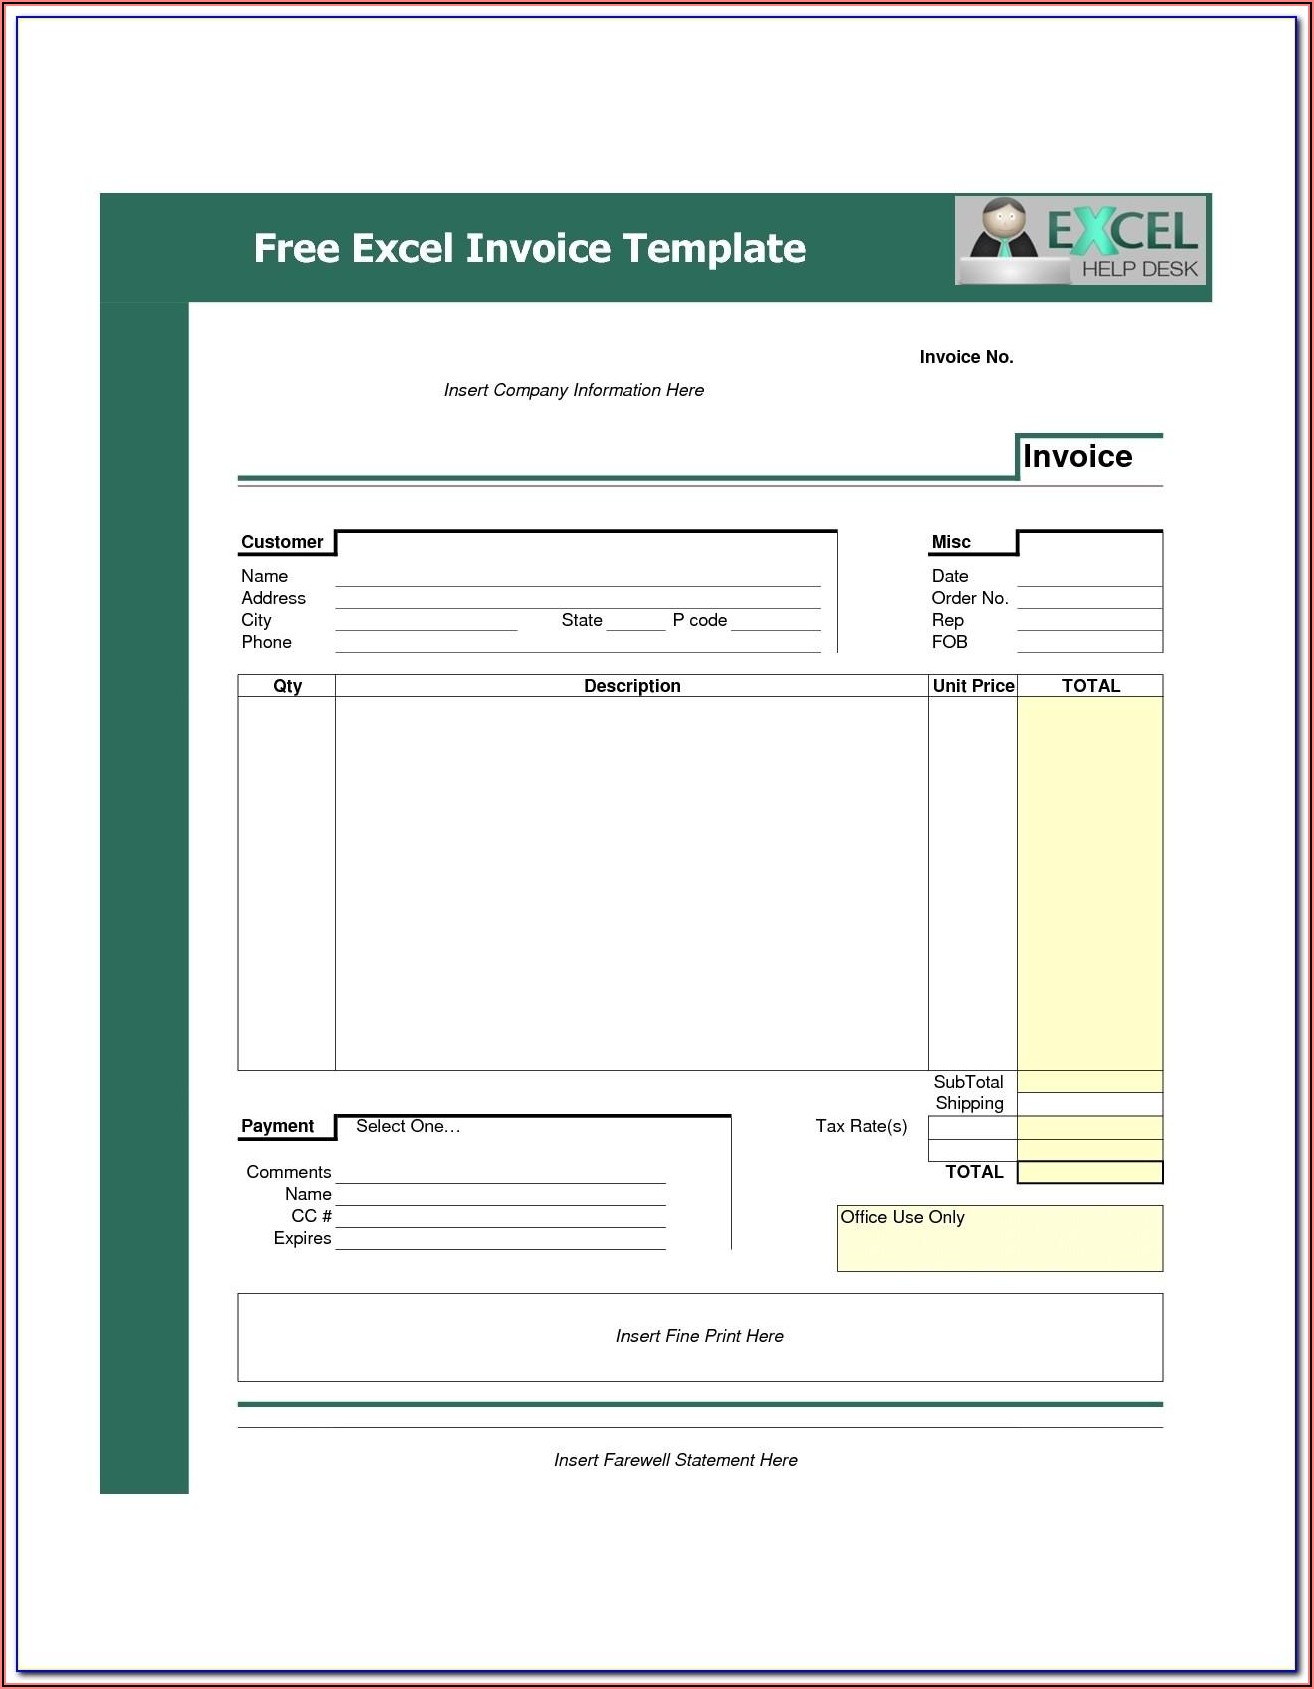 Rent Invoice Format In Excel Under Gst Tax